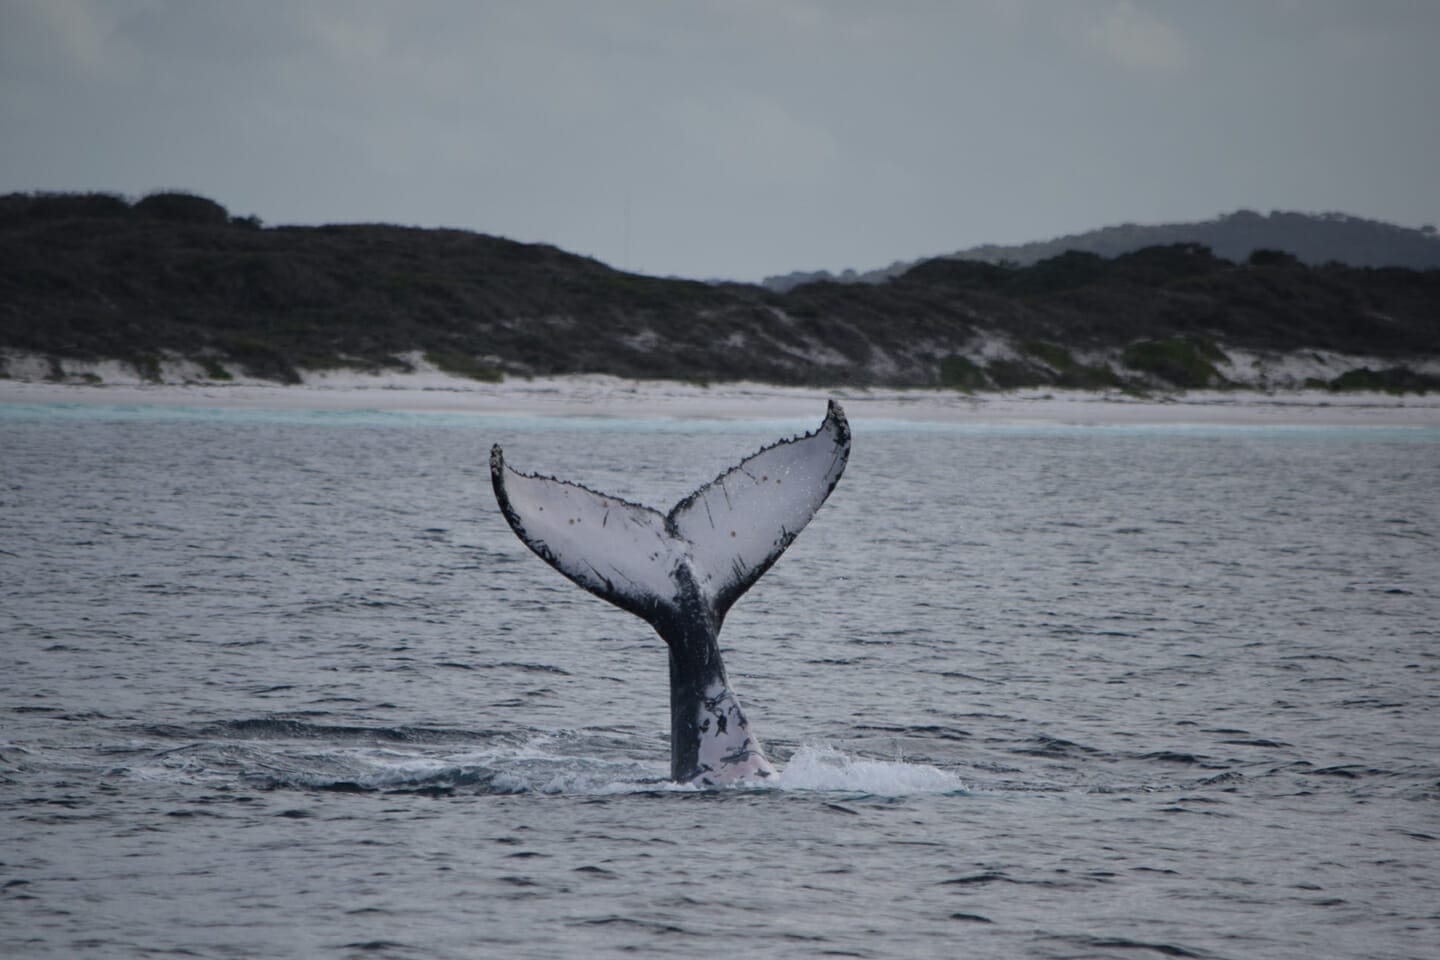 Humpback Whale in King George Sound, Albany. Photo Credit: Nathan